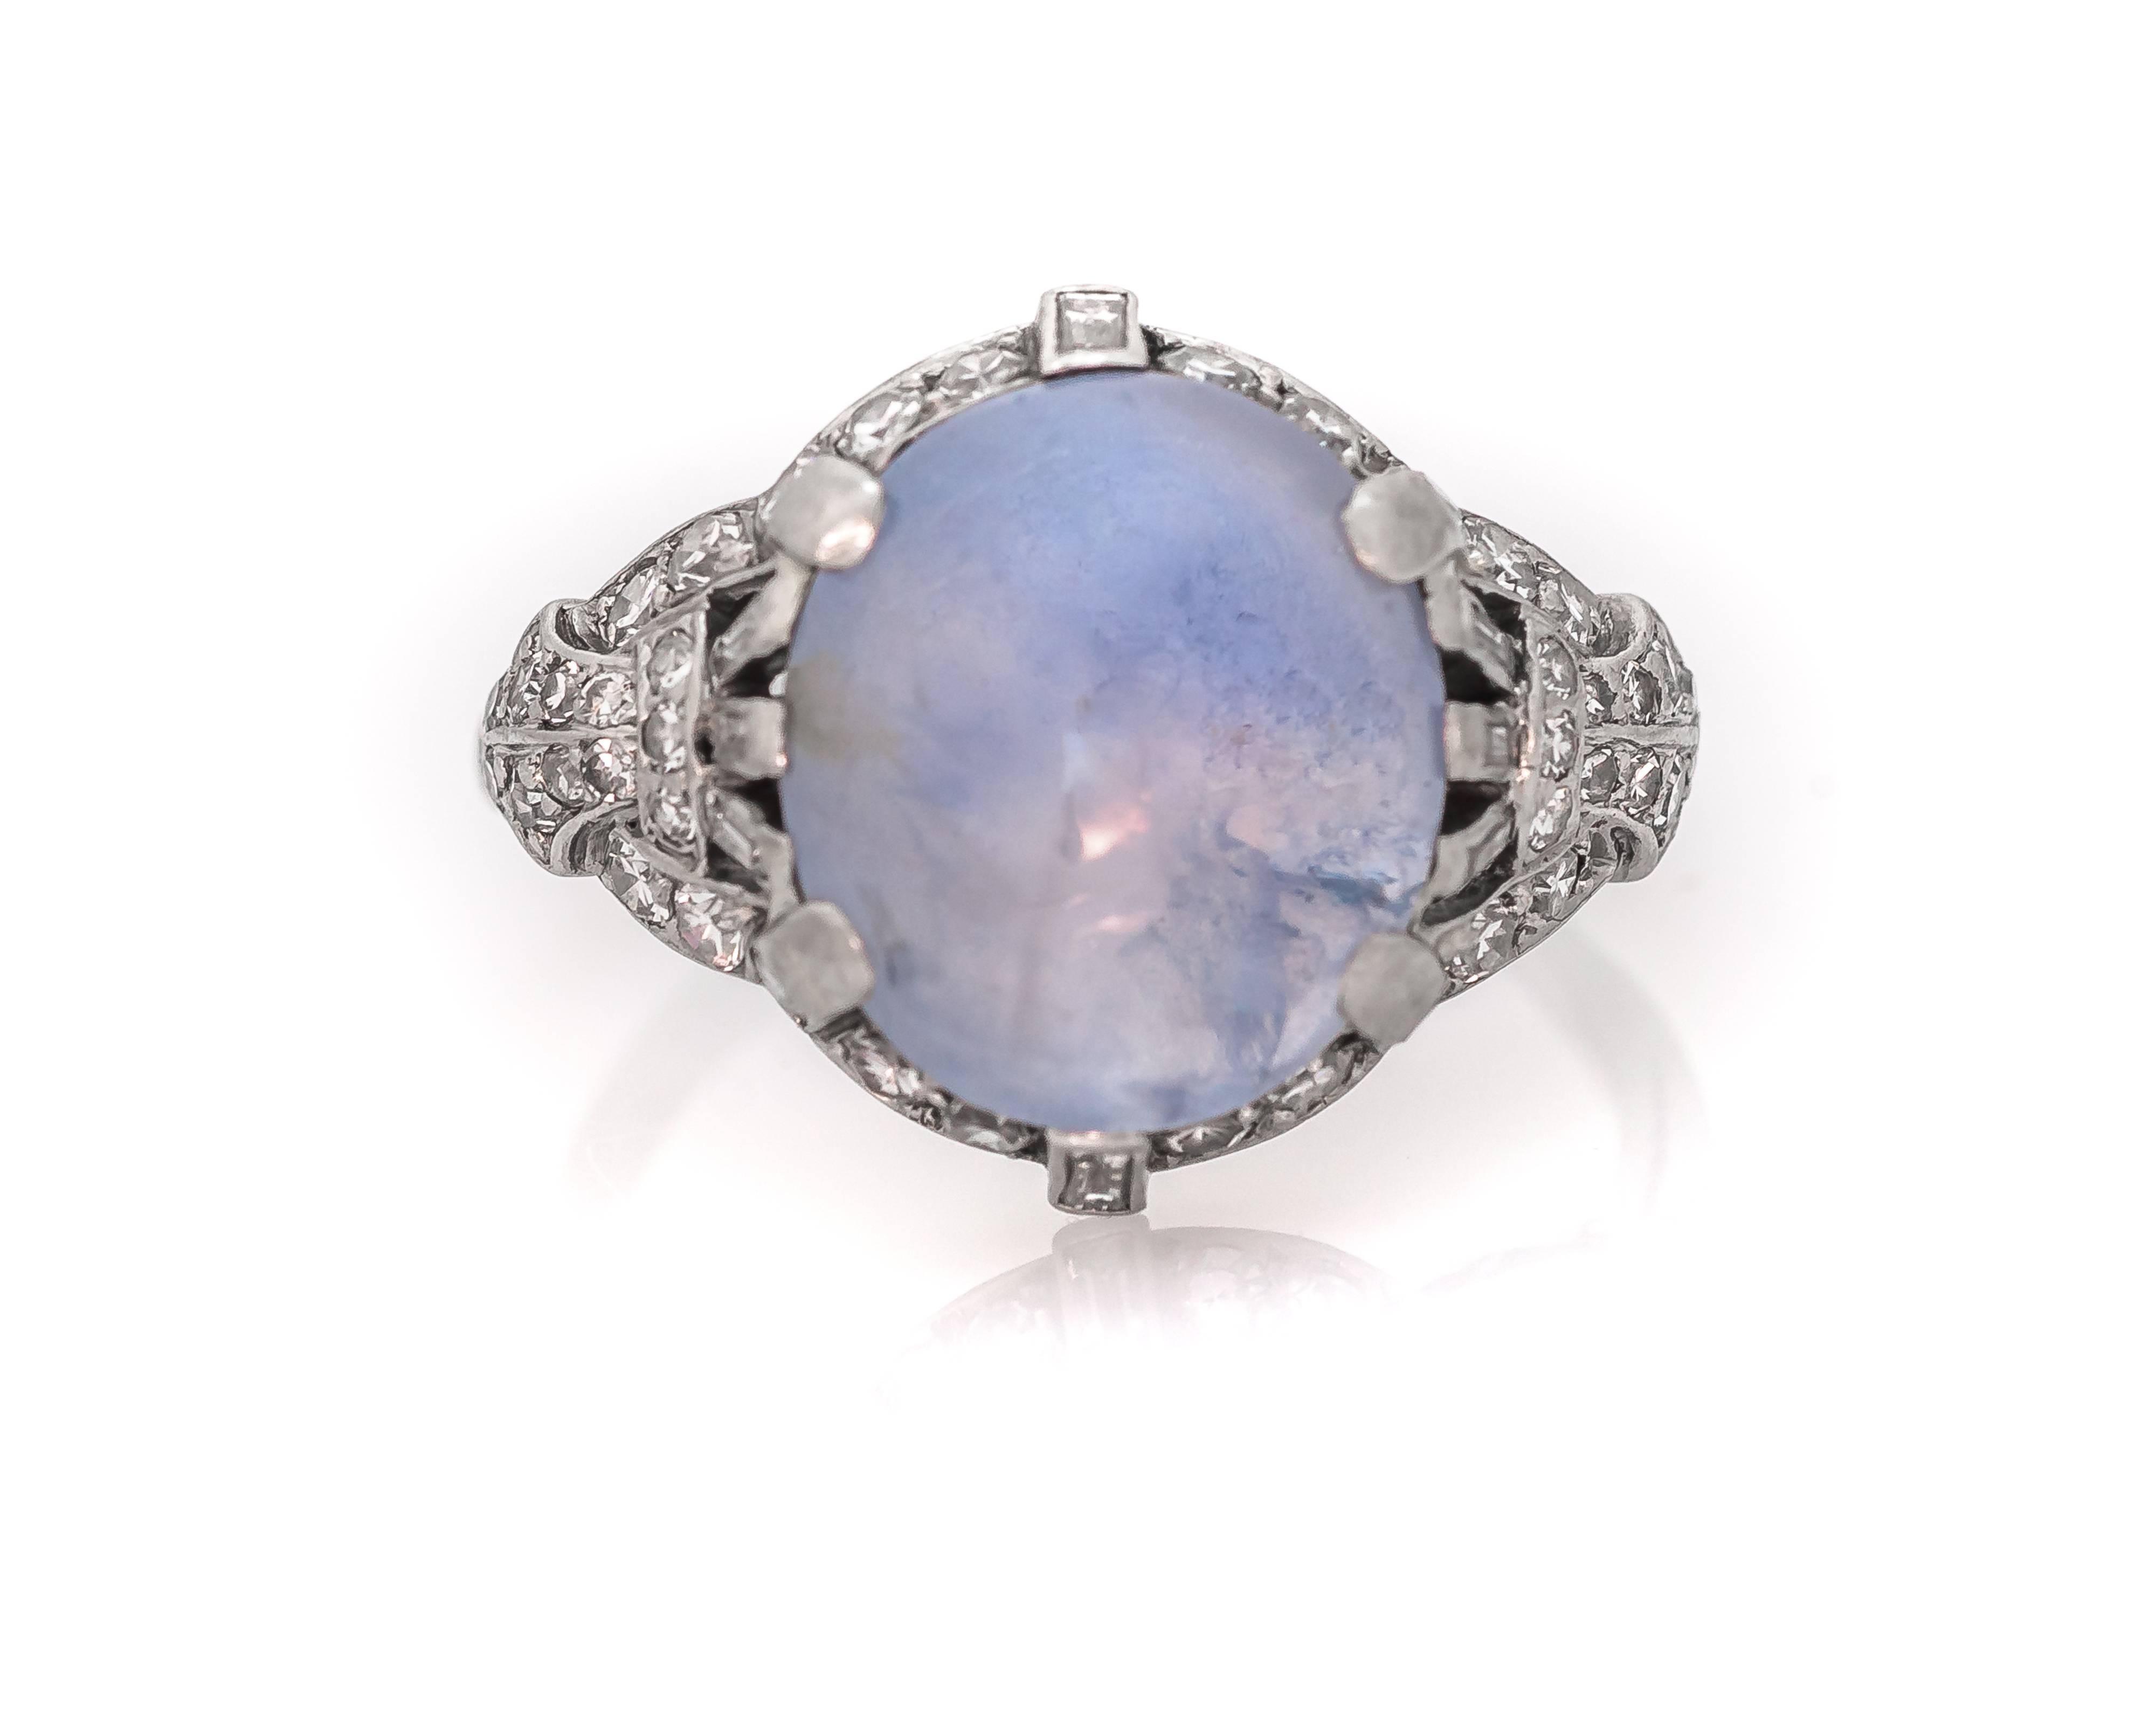 This 1930s 5 carat Star Sapphire and platinum ring was handmade by jeweler J. E. Caldwell and Co. The Sapphire is a beautiful translucent light blue and is prong-set with 6 larger prongs; two prongs feature an accent baguette diamond. Lovely